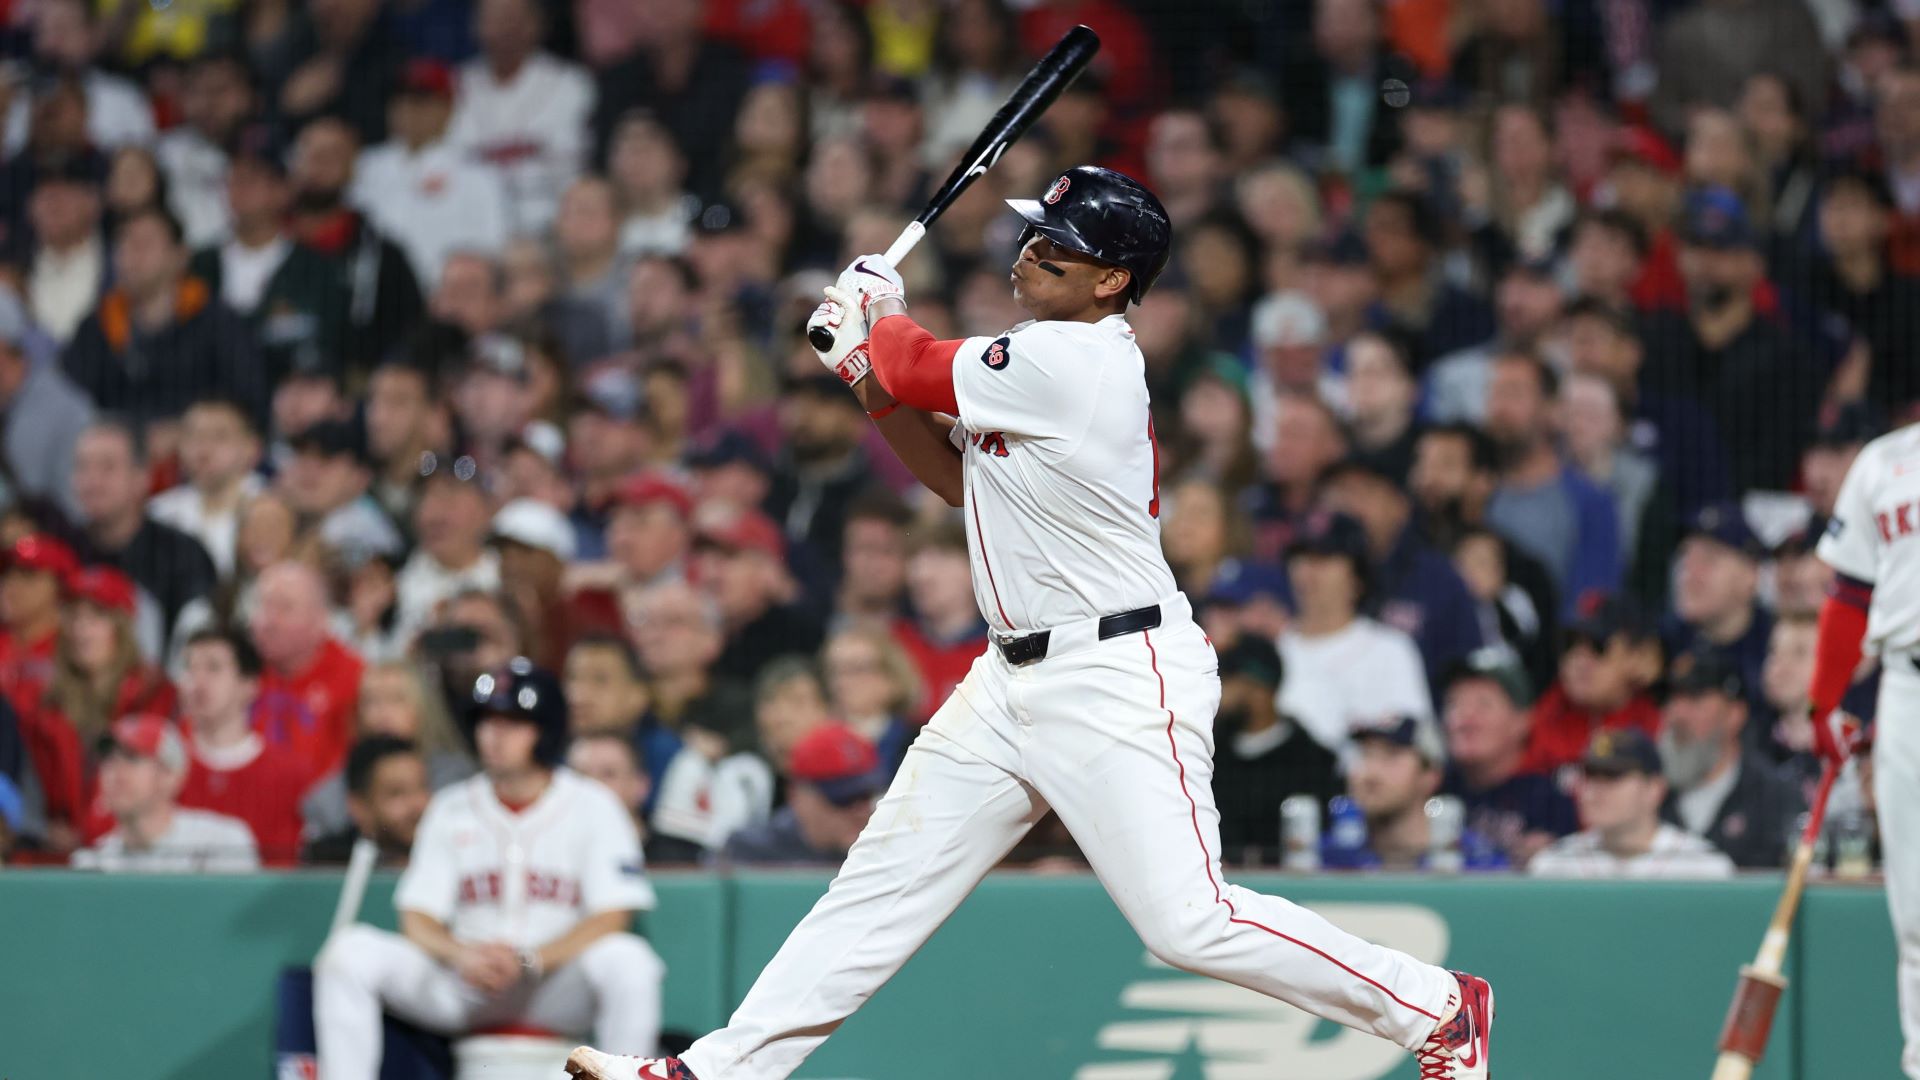 Alex Cora Provides Concerning Injury Update On Red Sox Star Rafael
Devers